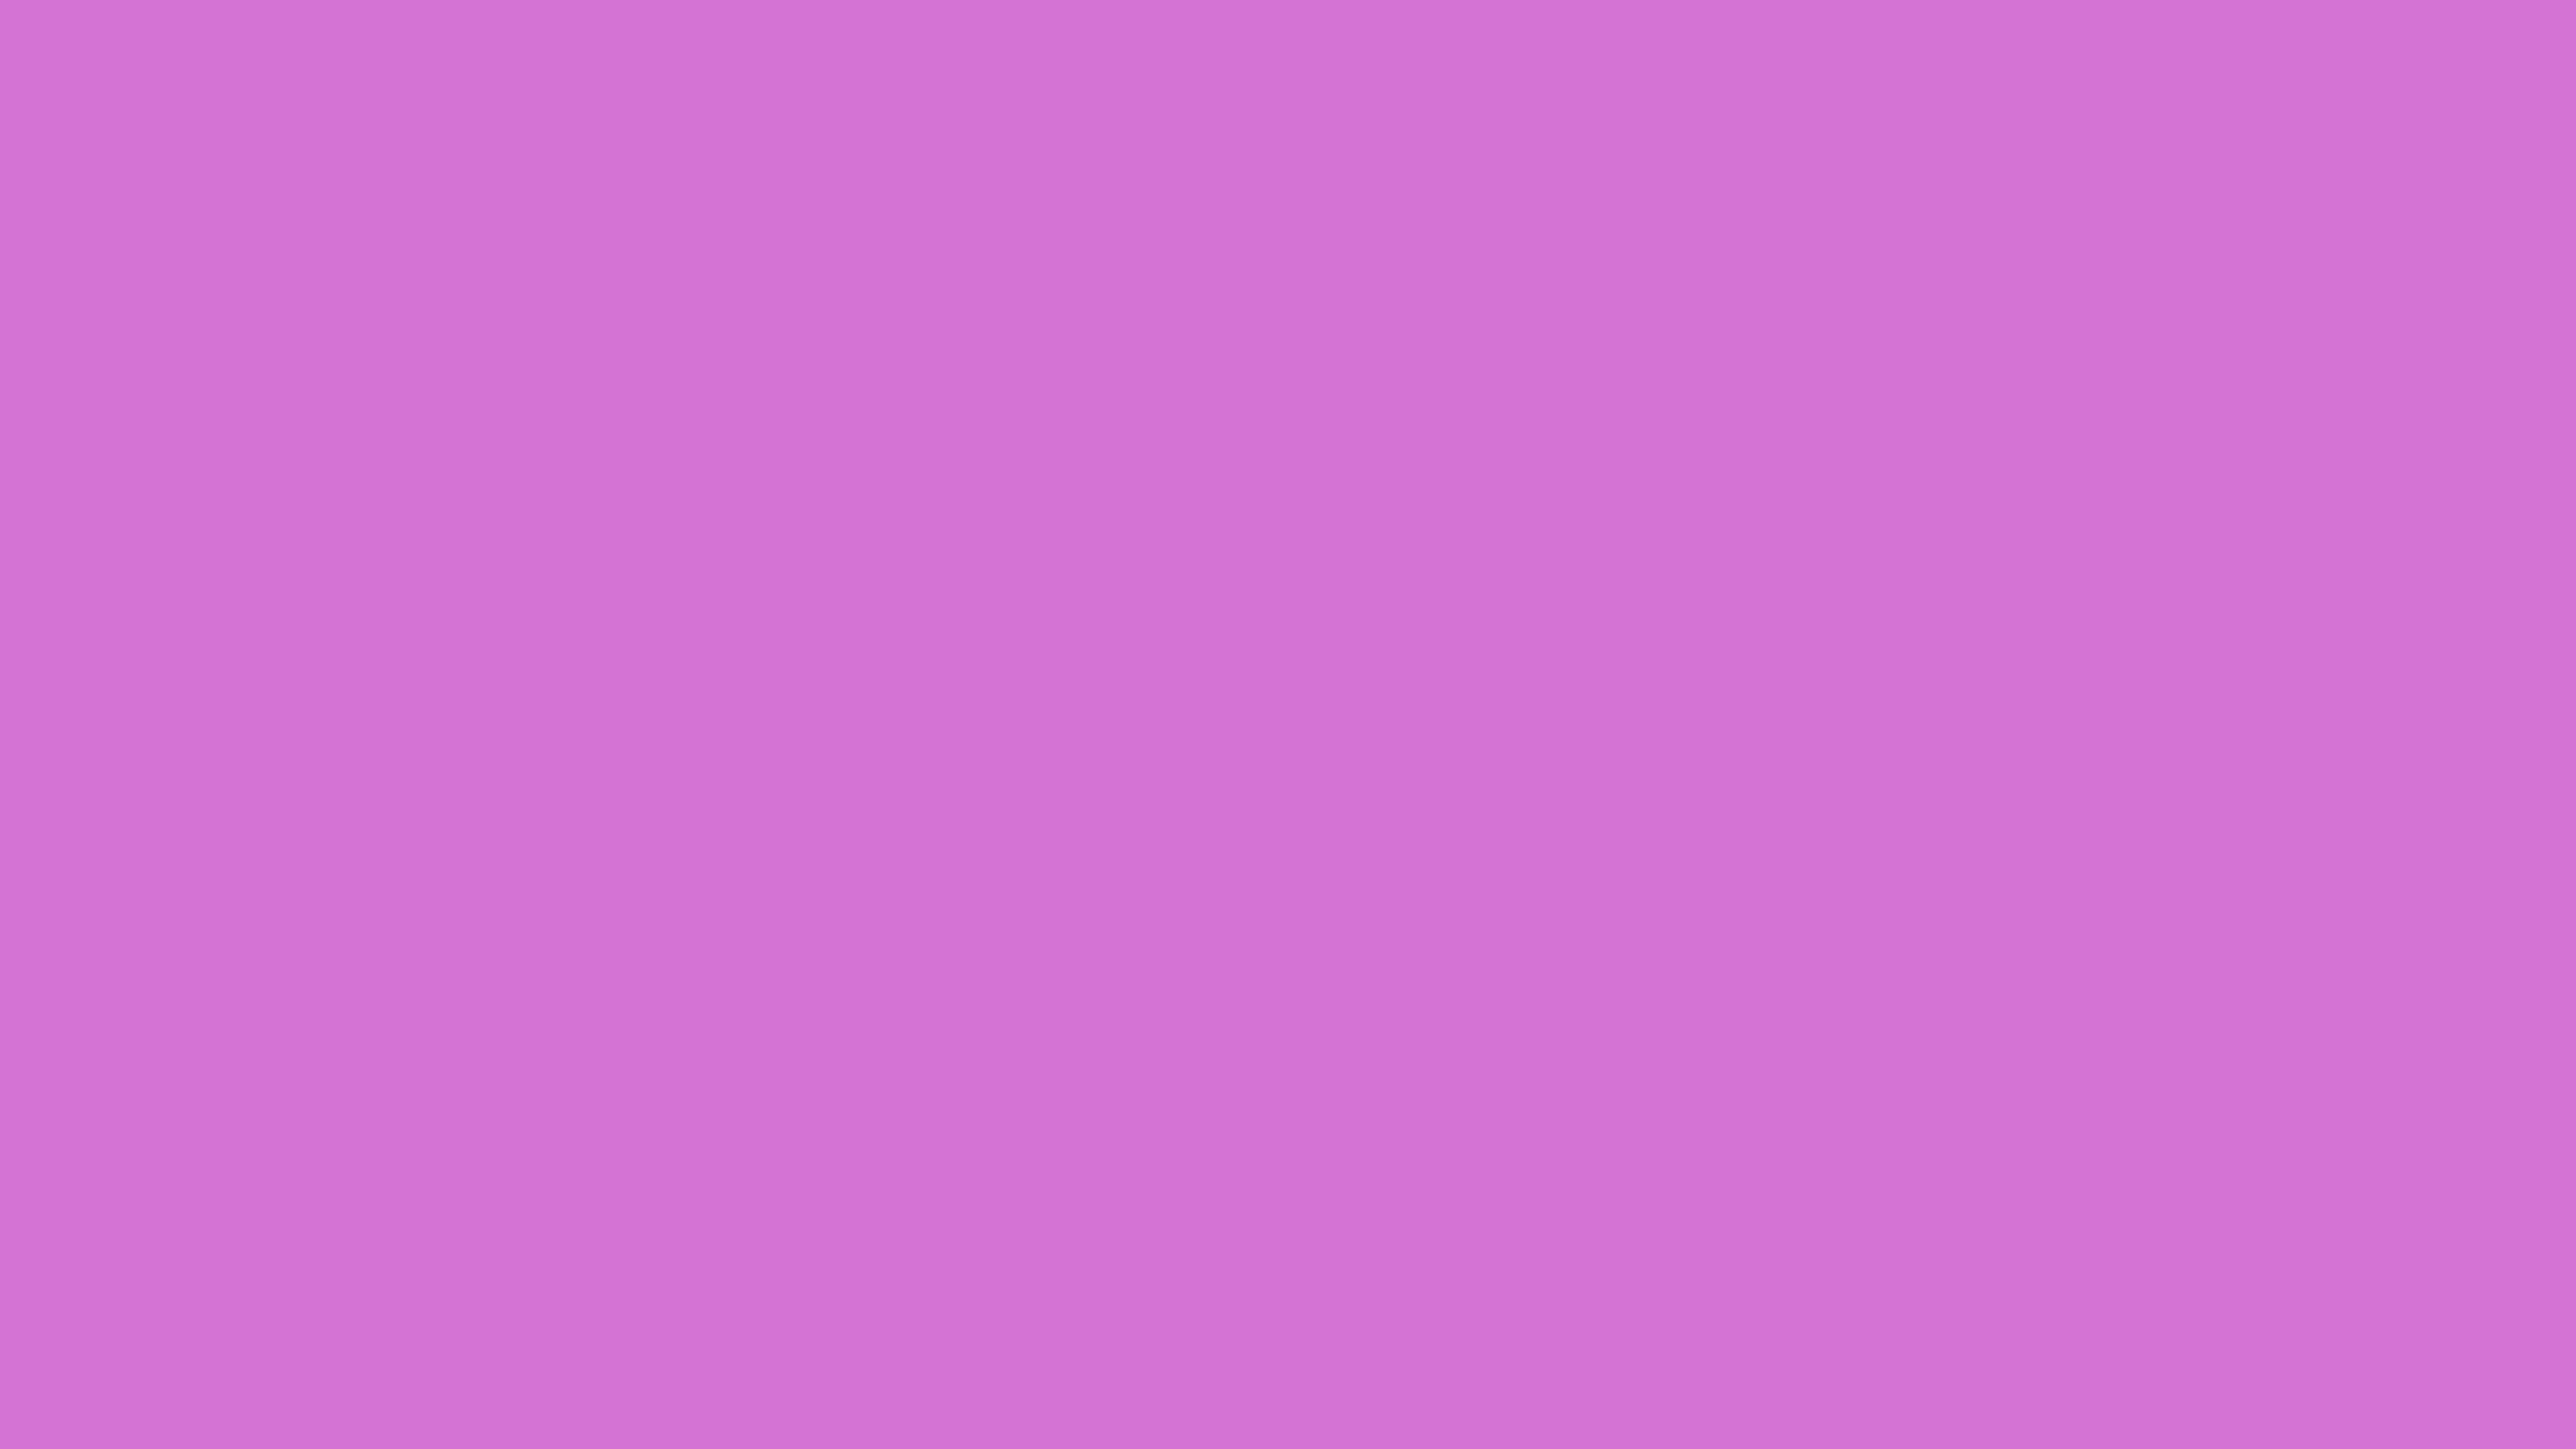 7680x4320 French Mauve Solid Color Background